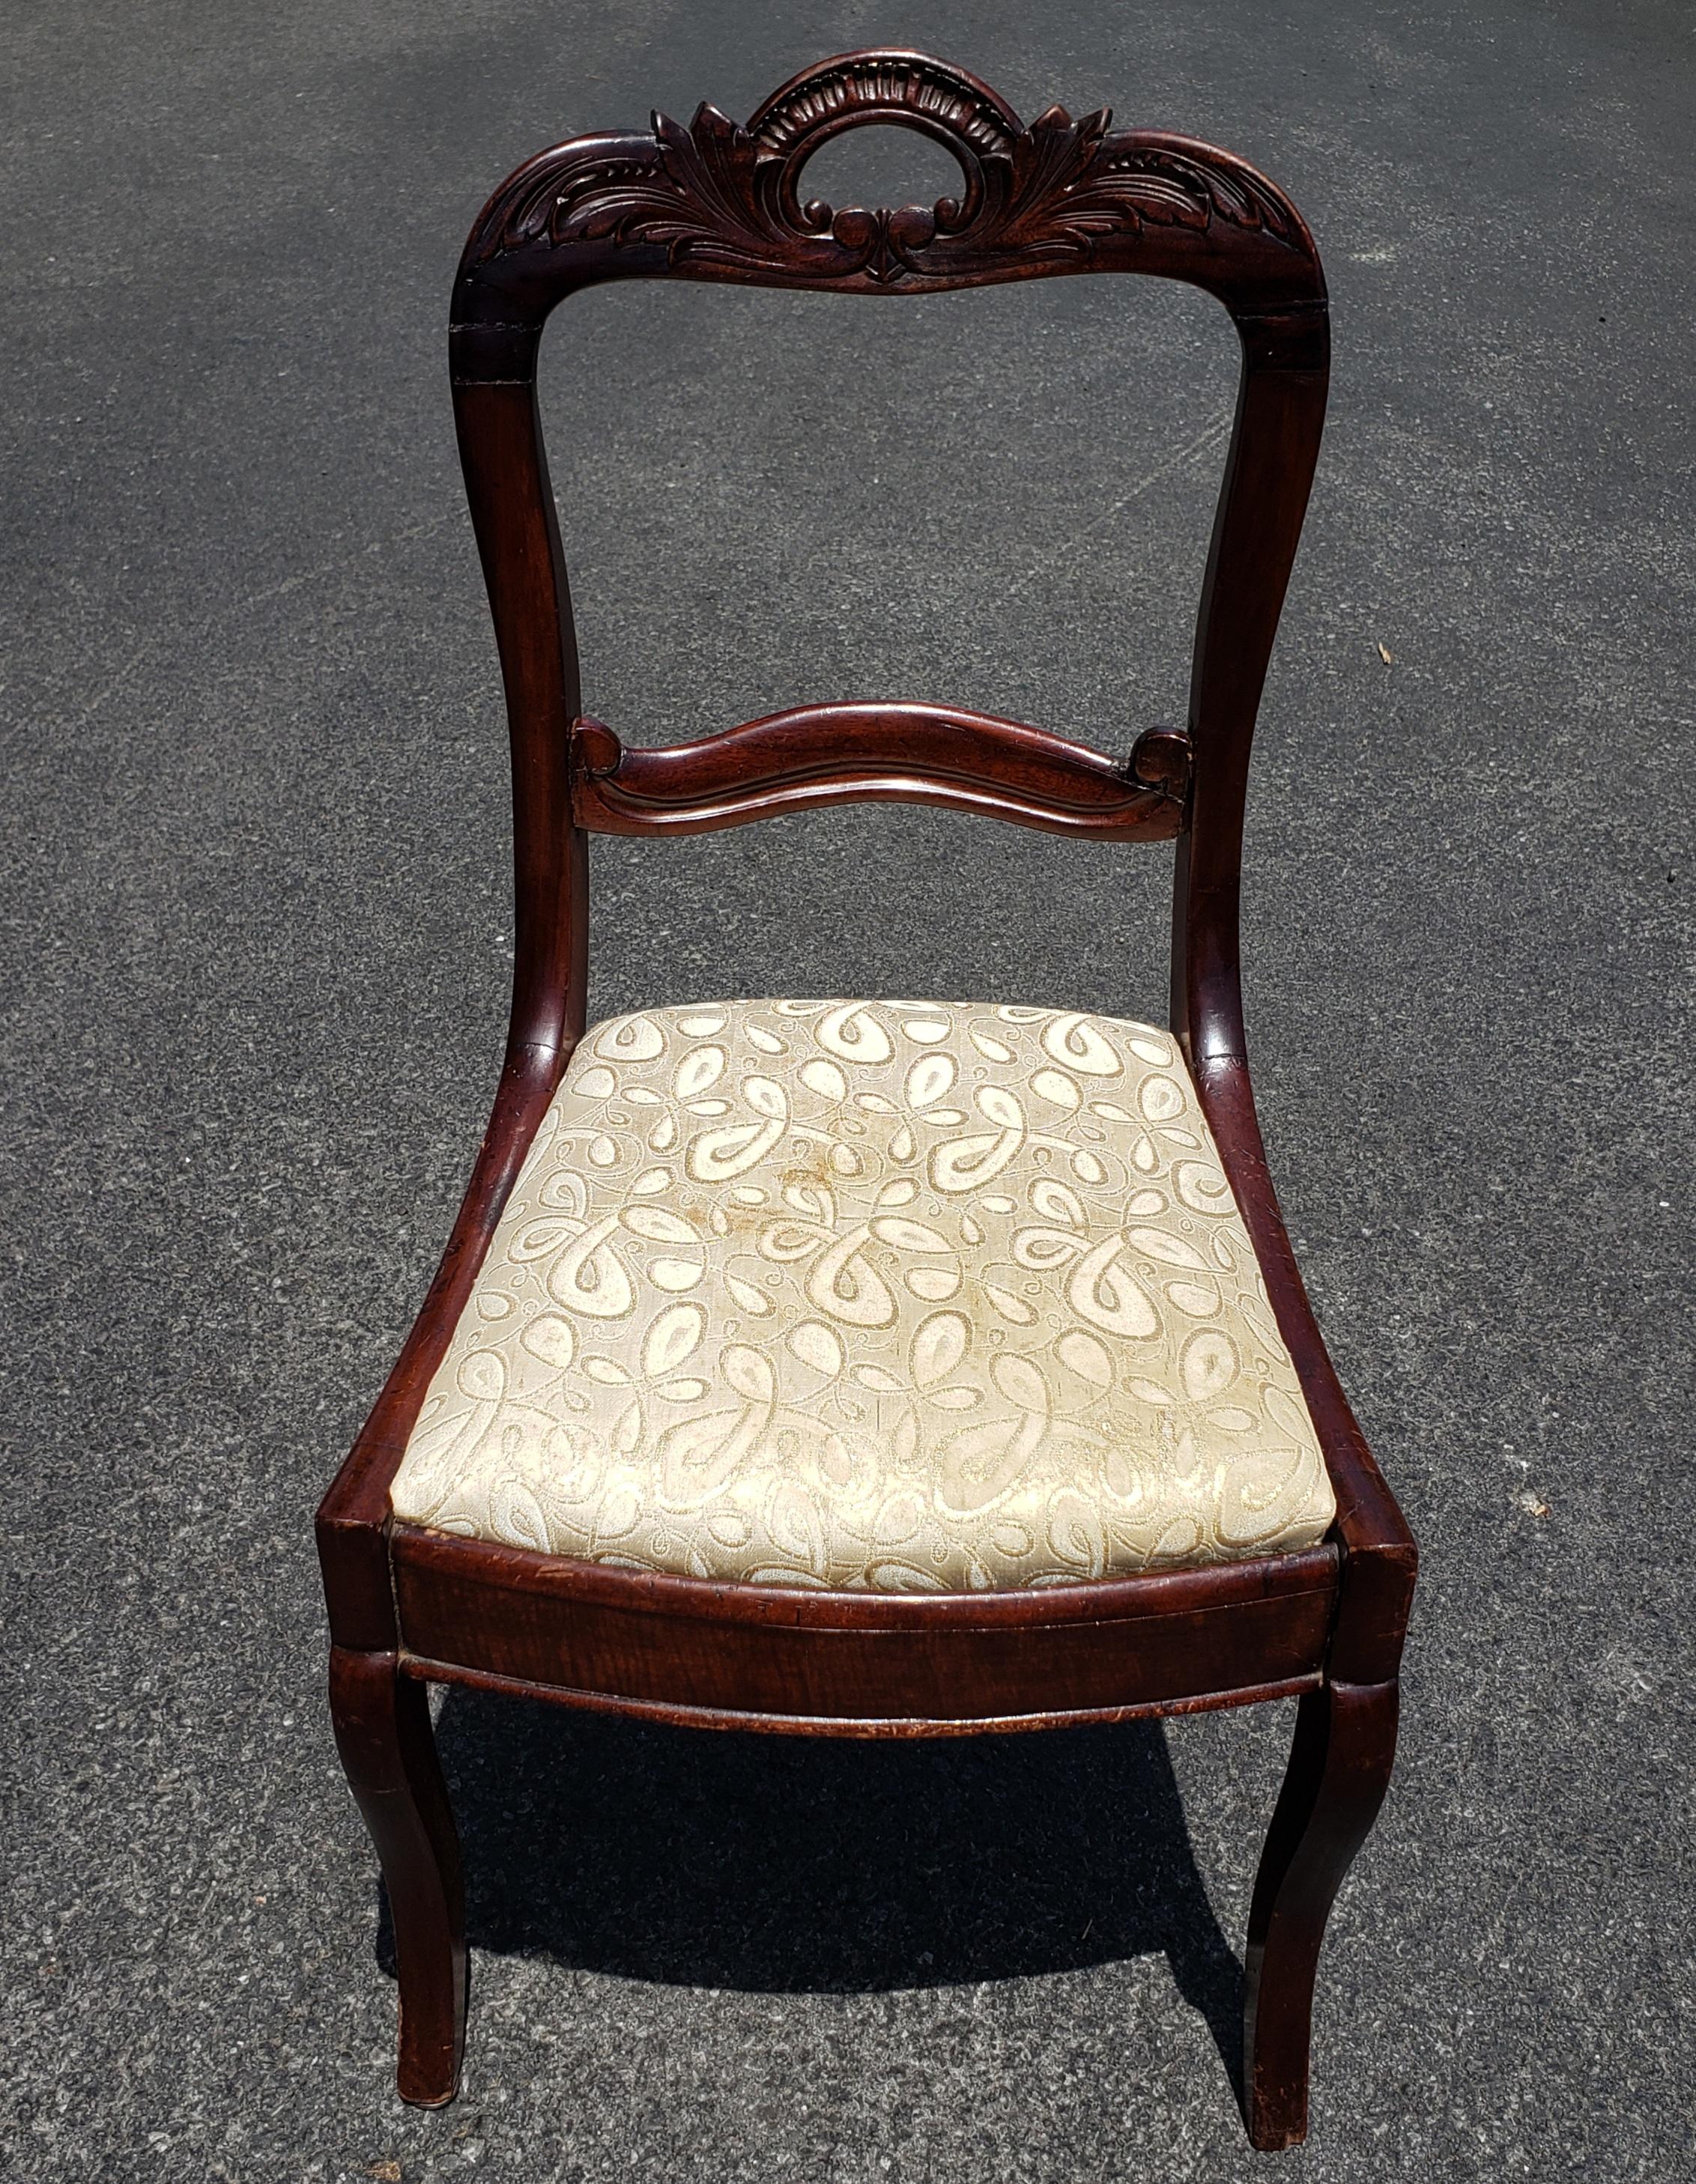 19th century Victorian Hancrafted and Carved Mahogany Ladder Back and upholdtered seat Chair.
Good antique sturdy condition. Measures 18